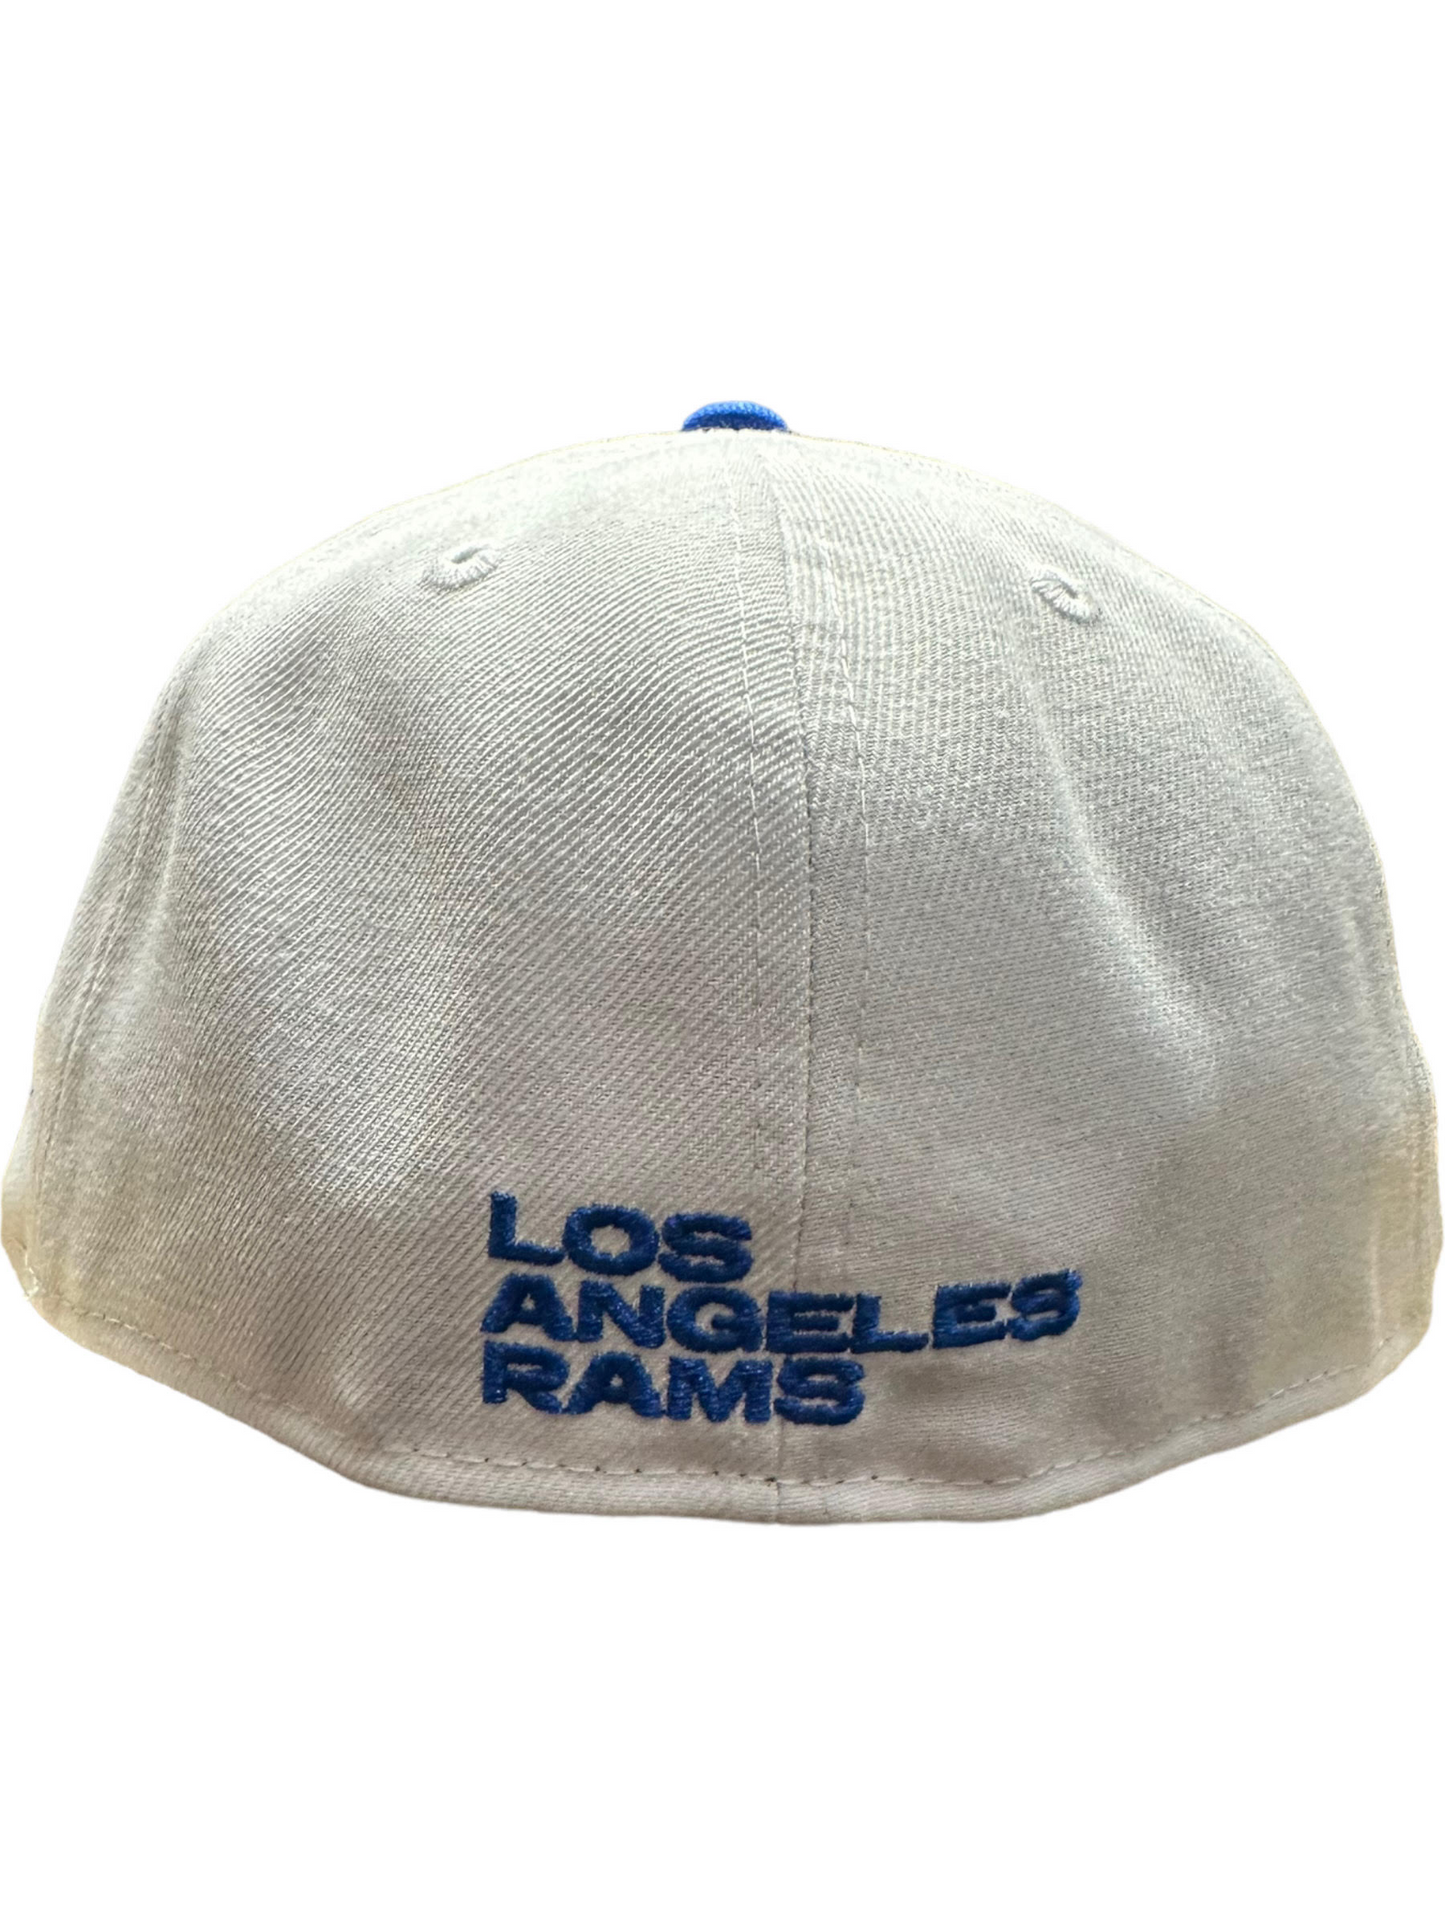 LOS ANGELES RAMS MEN'S WHITE/BLUE STATE 59FIFTY FITTED